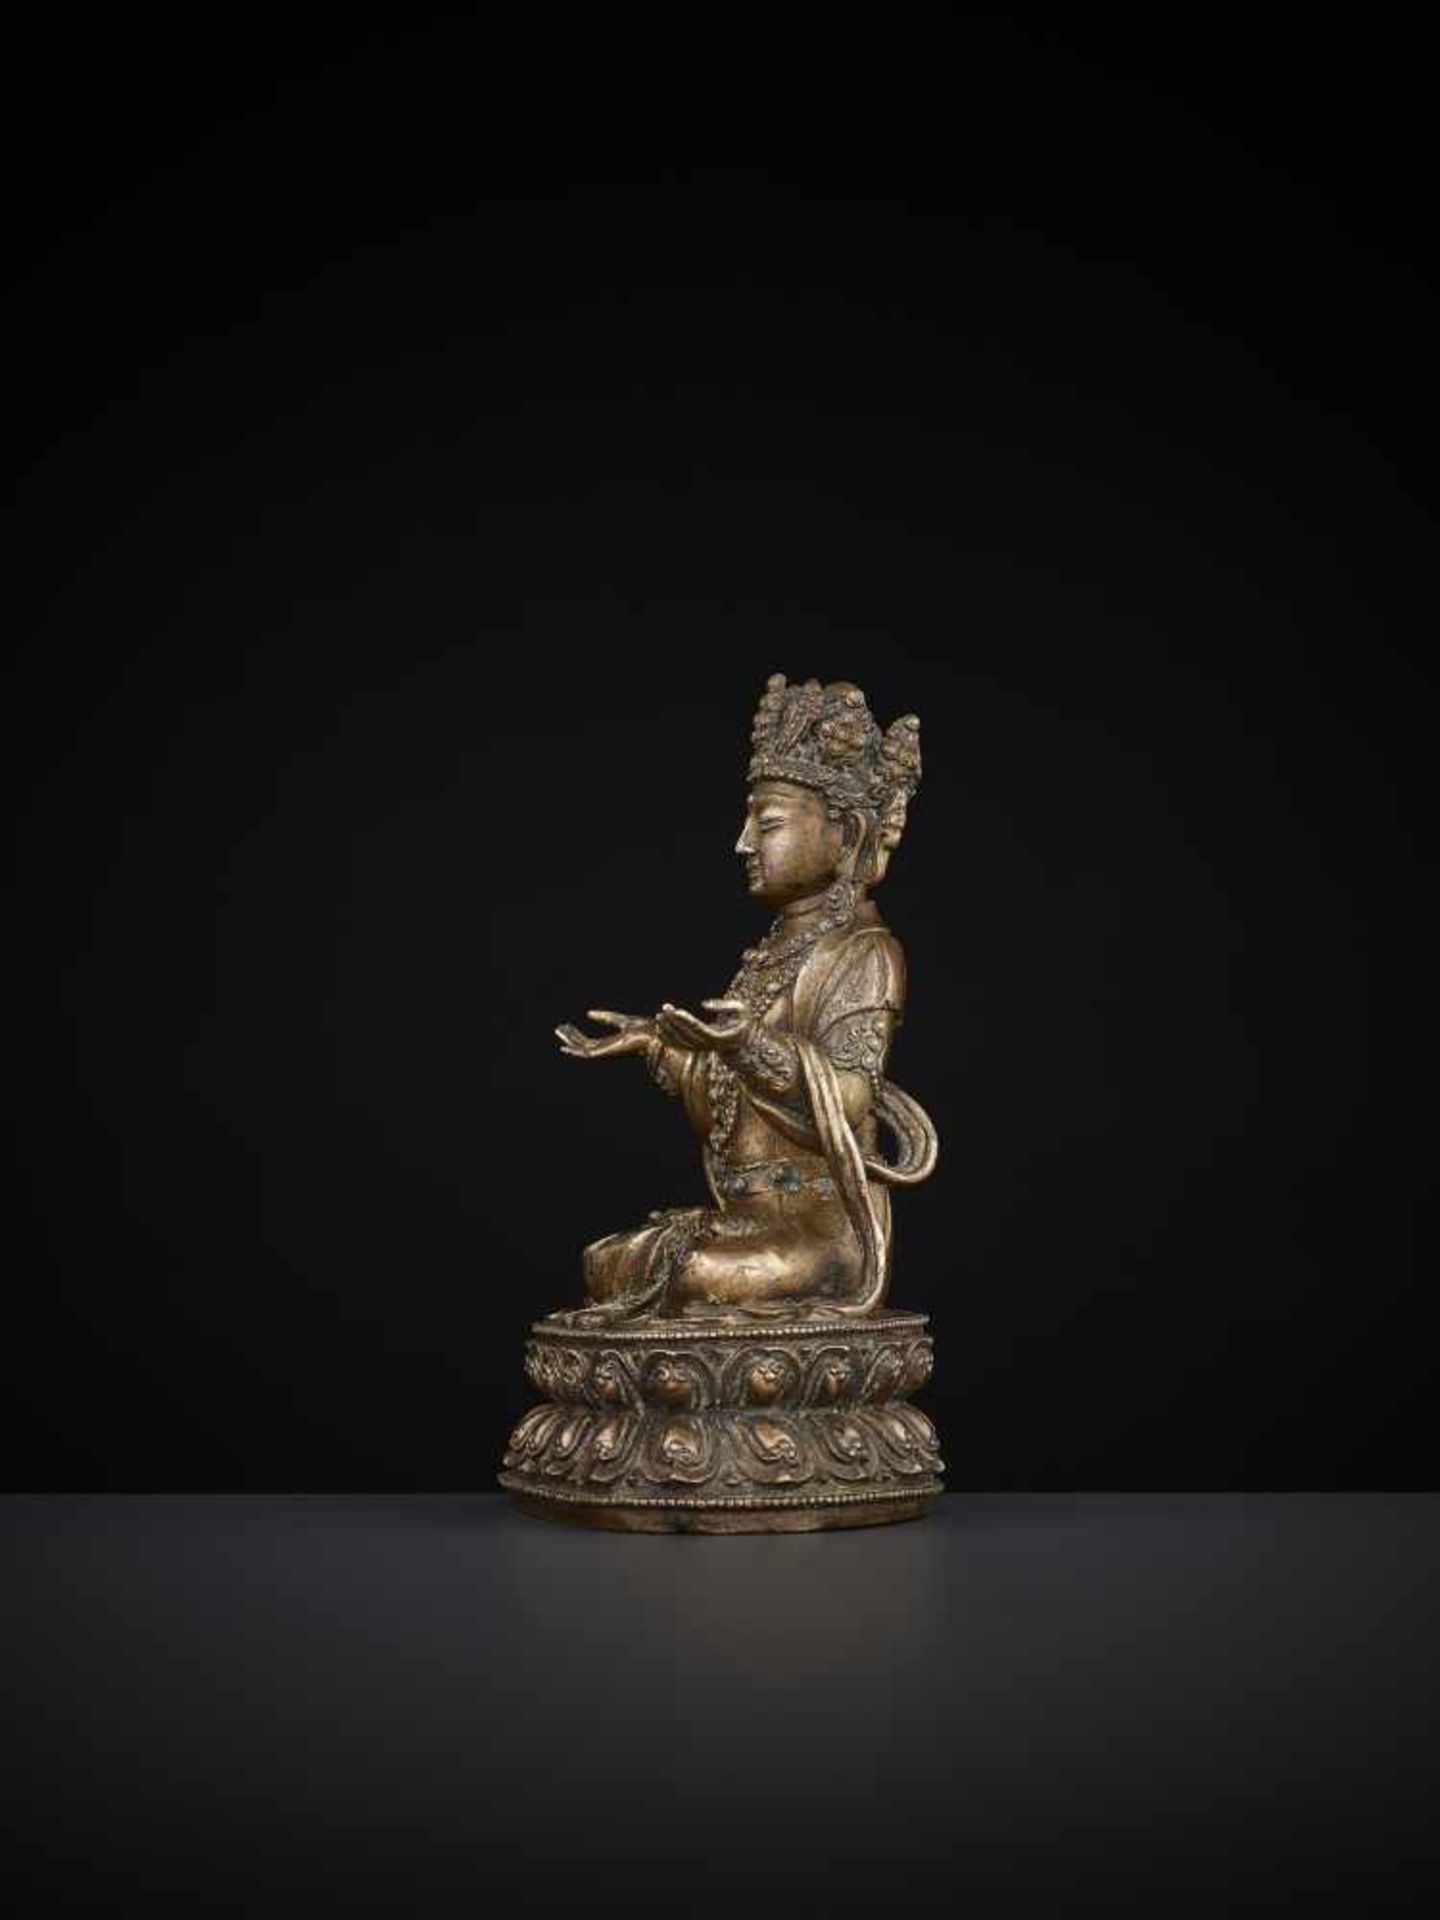 A COPPER-BRONZE STATUE OF BODHISATTVA Tibetan-Chinese, 15th – 16th century. Bodhisattva is seated in - Image 5 of 11